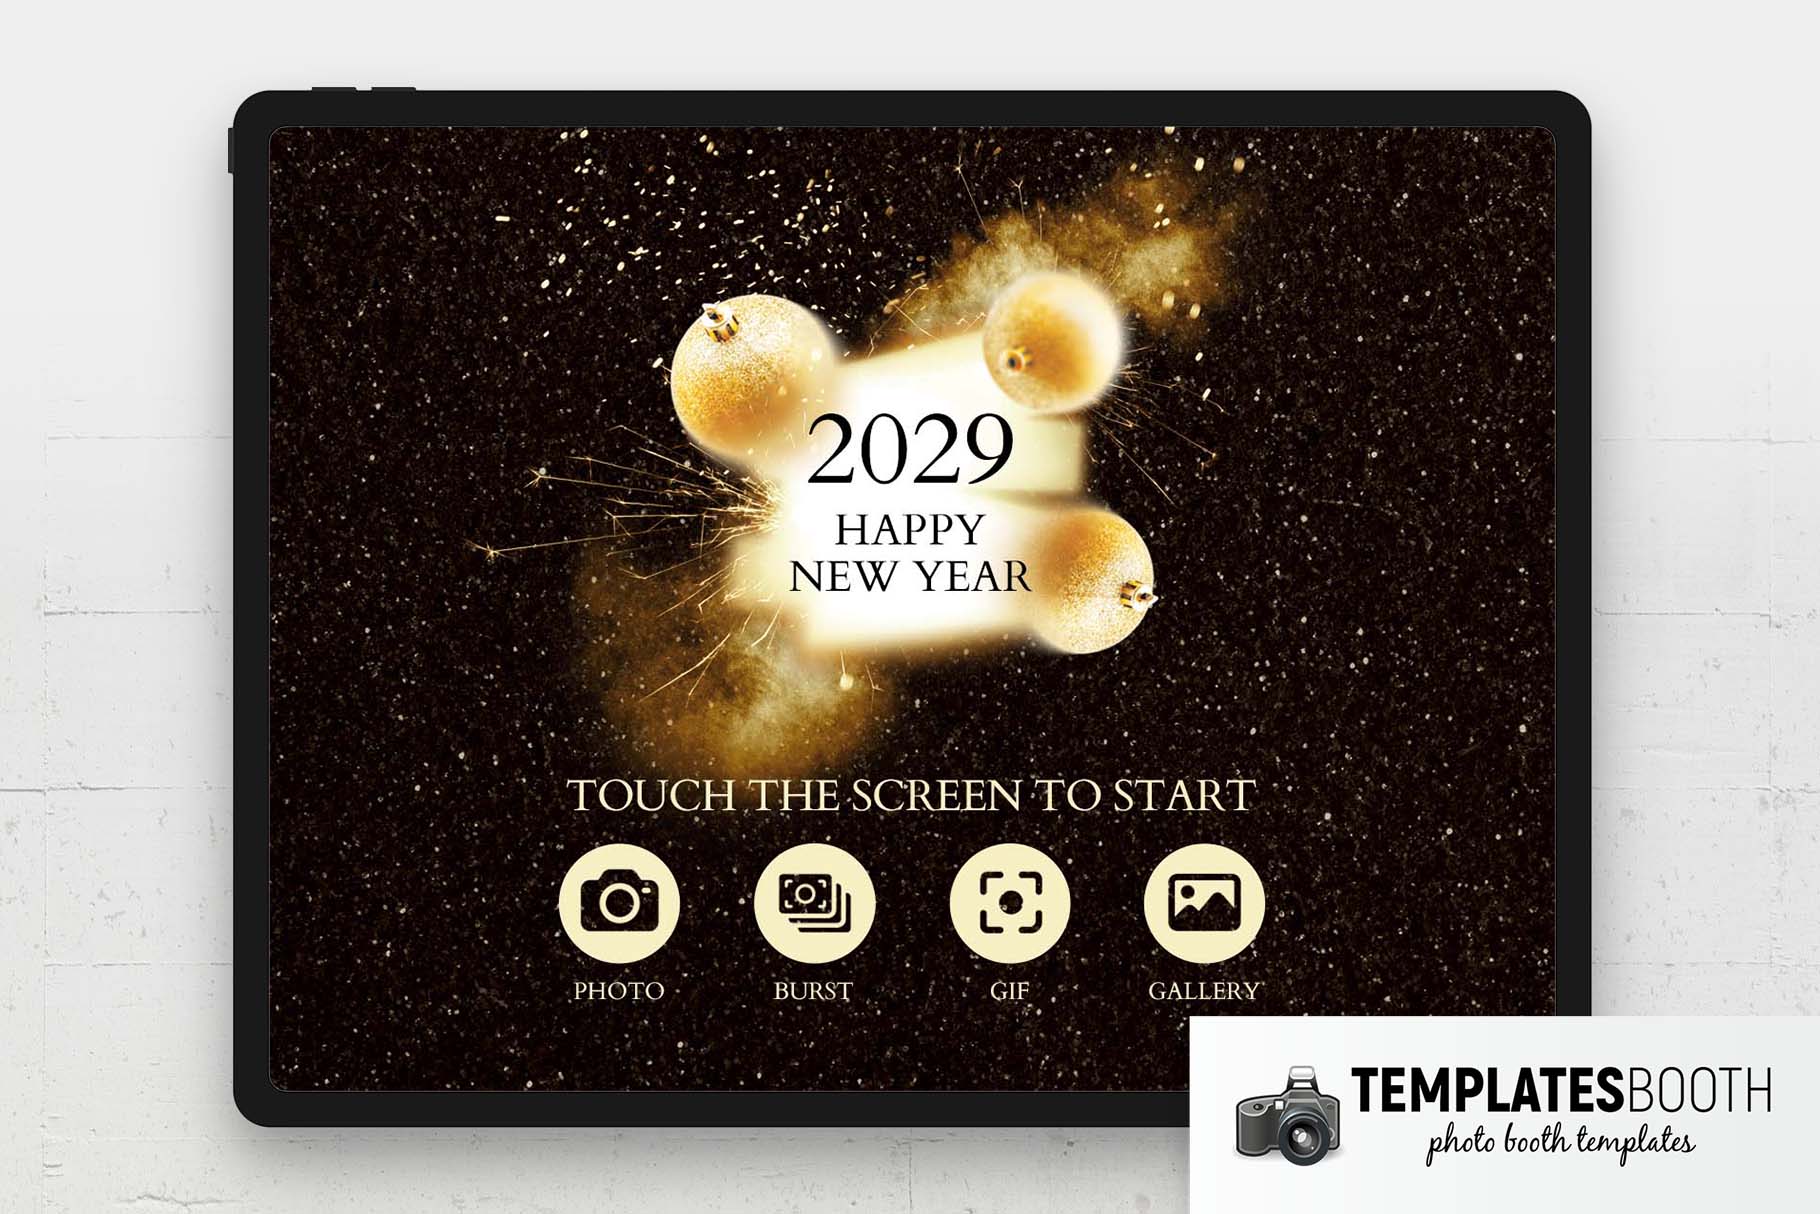 Black & Gold New Year Photo Booth Welcome Screen